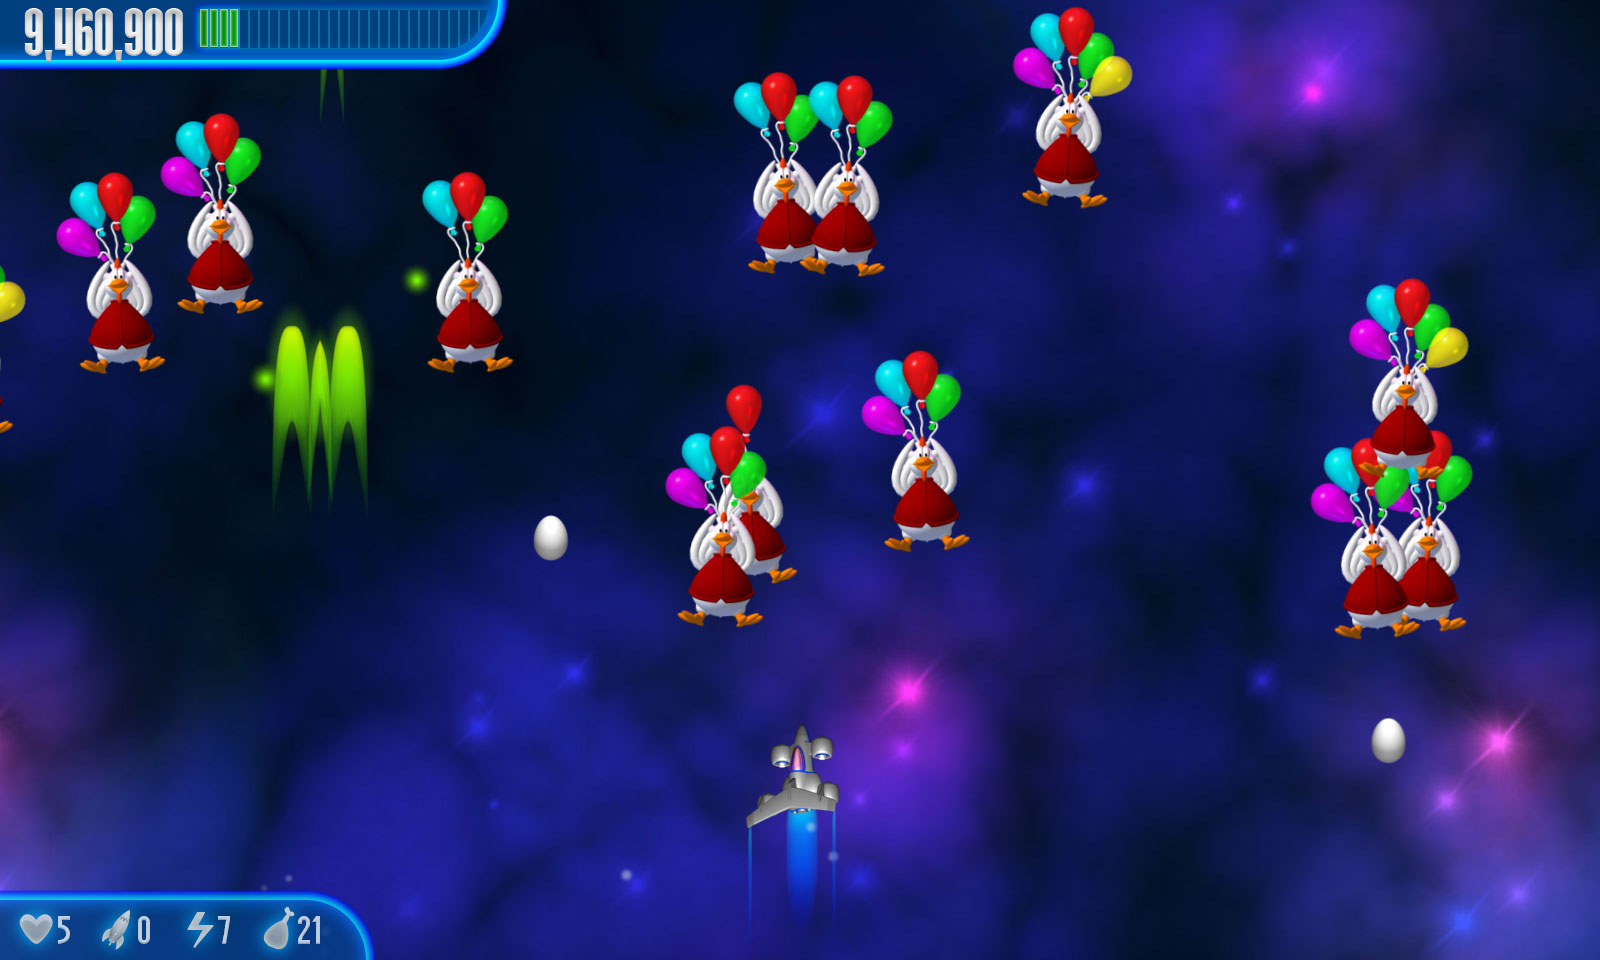 free game chicken invaders 3 download